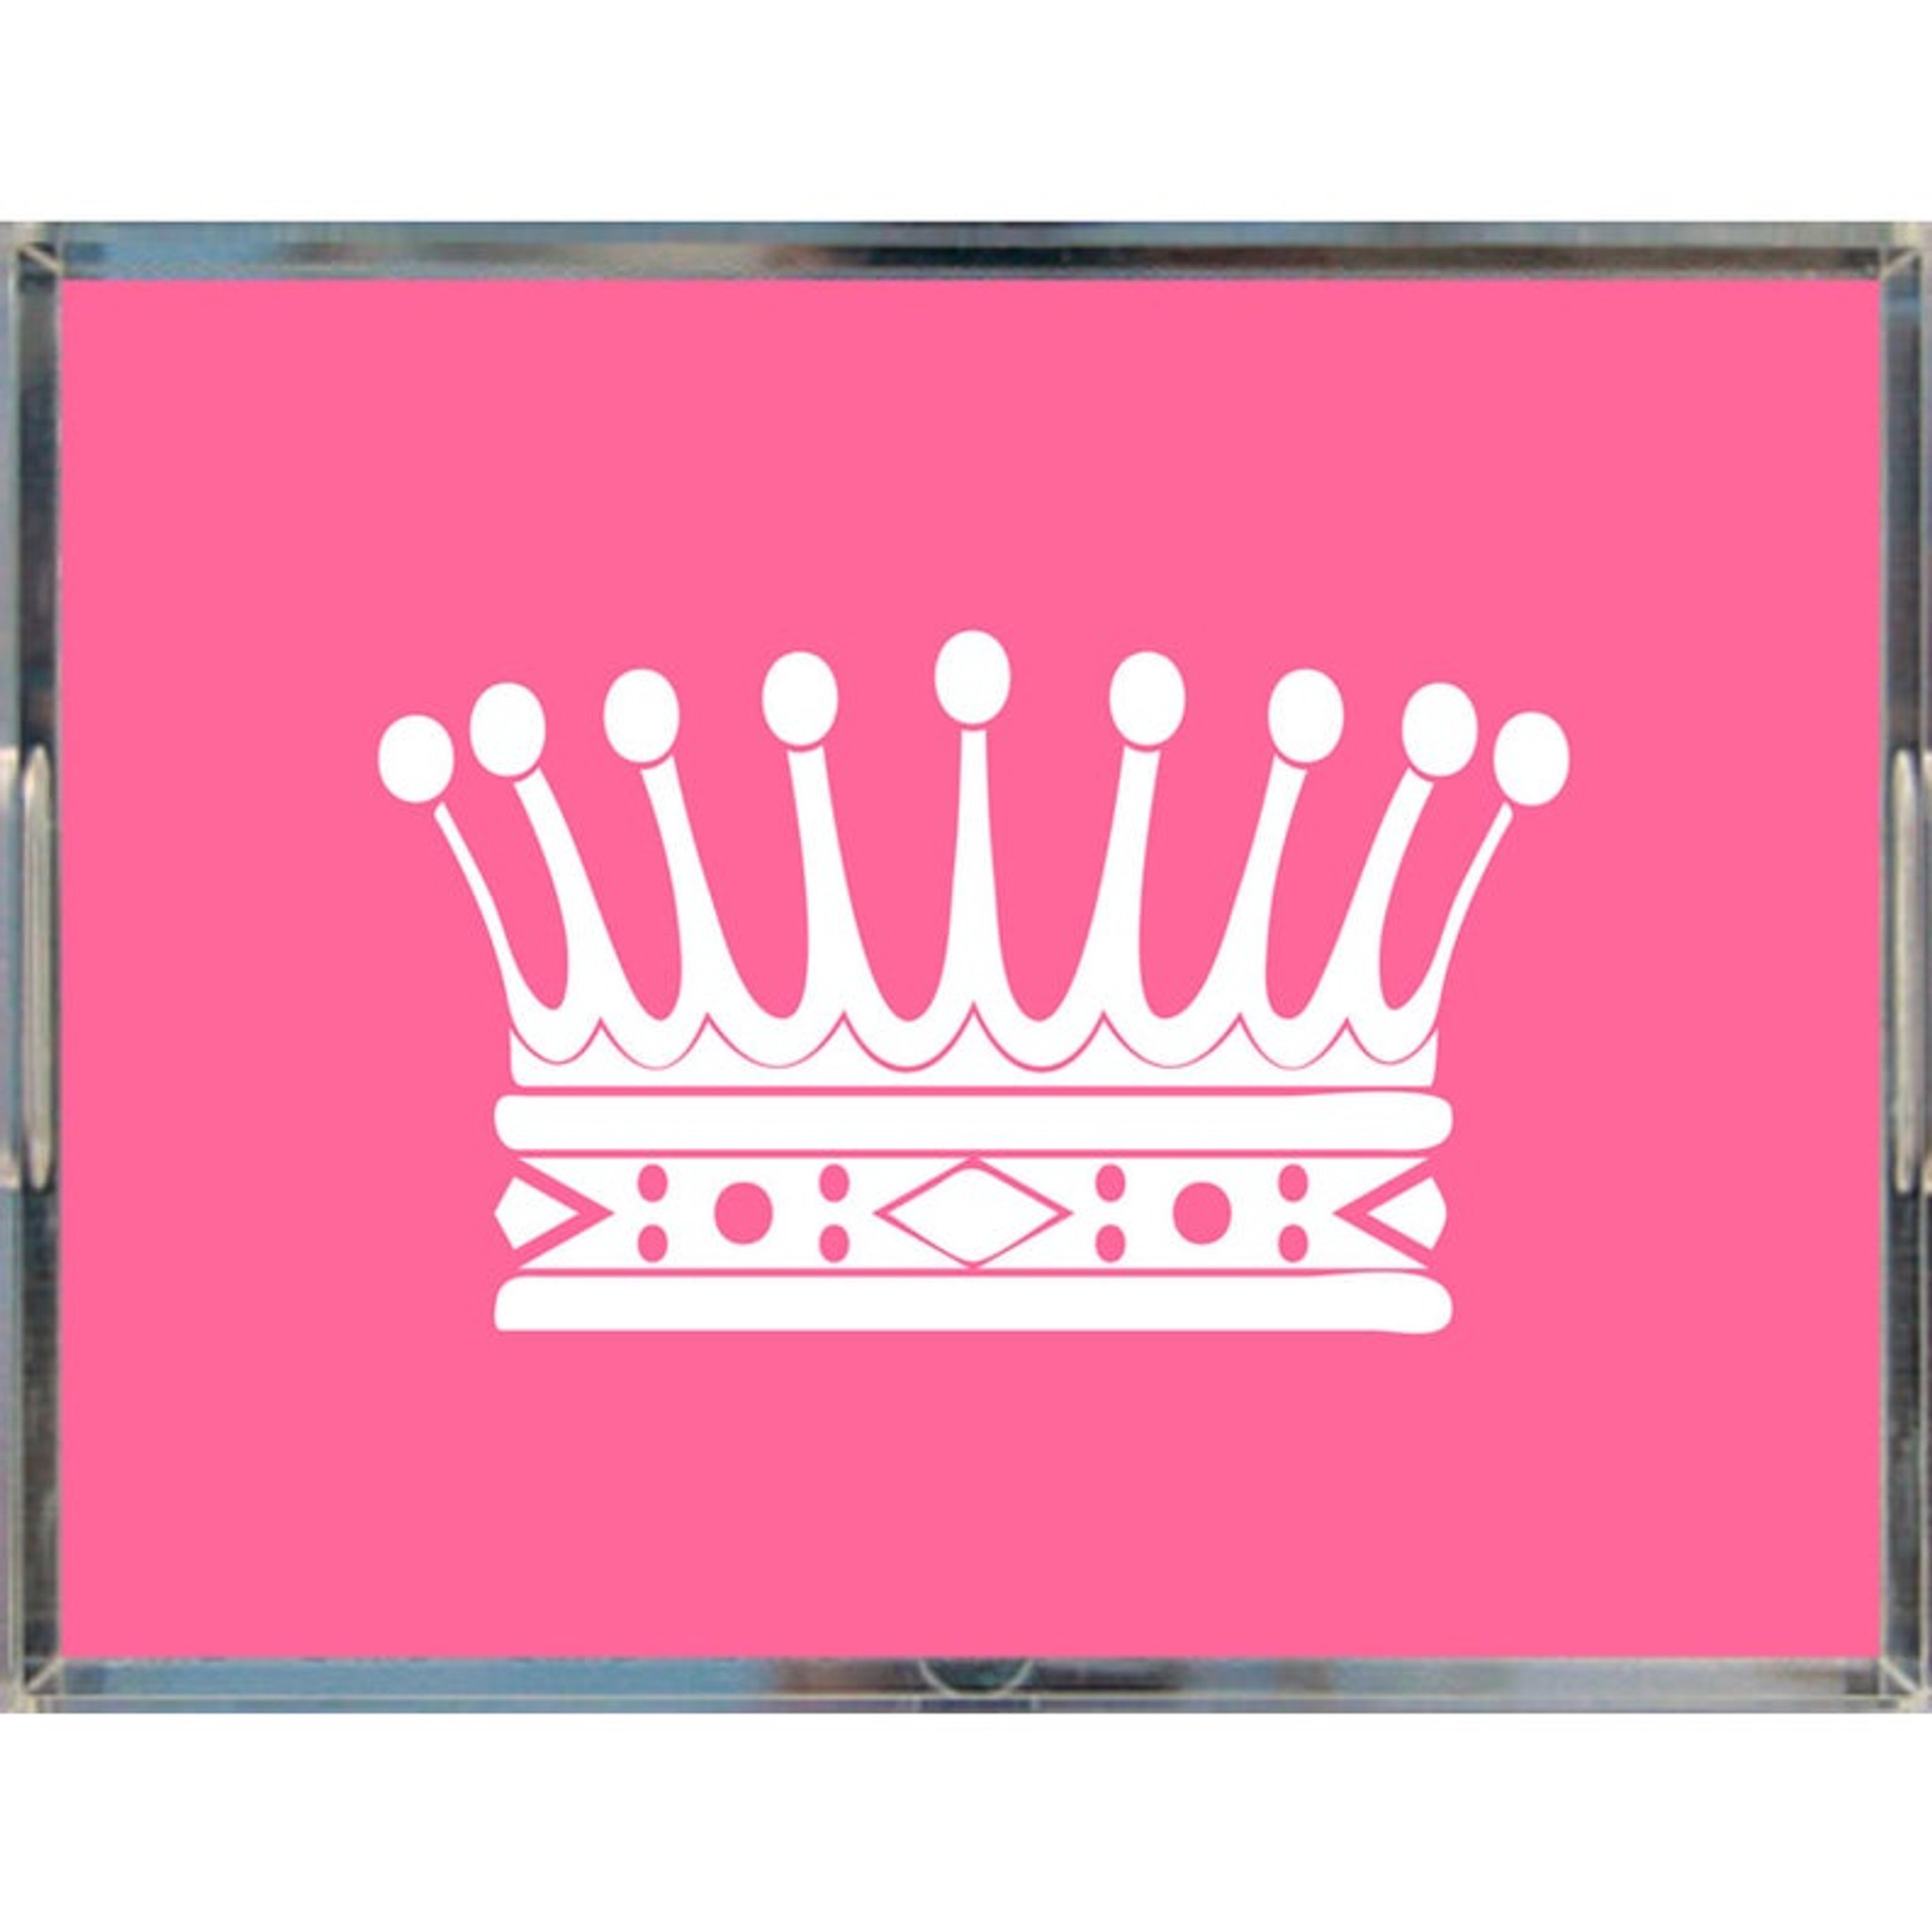 large acrylic make up jewelry decorative tray princess crown hot pink blush handles lucite